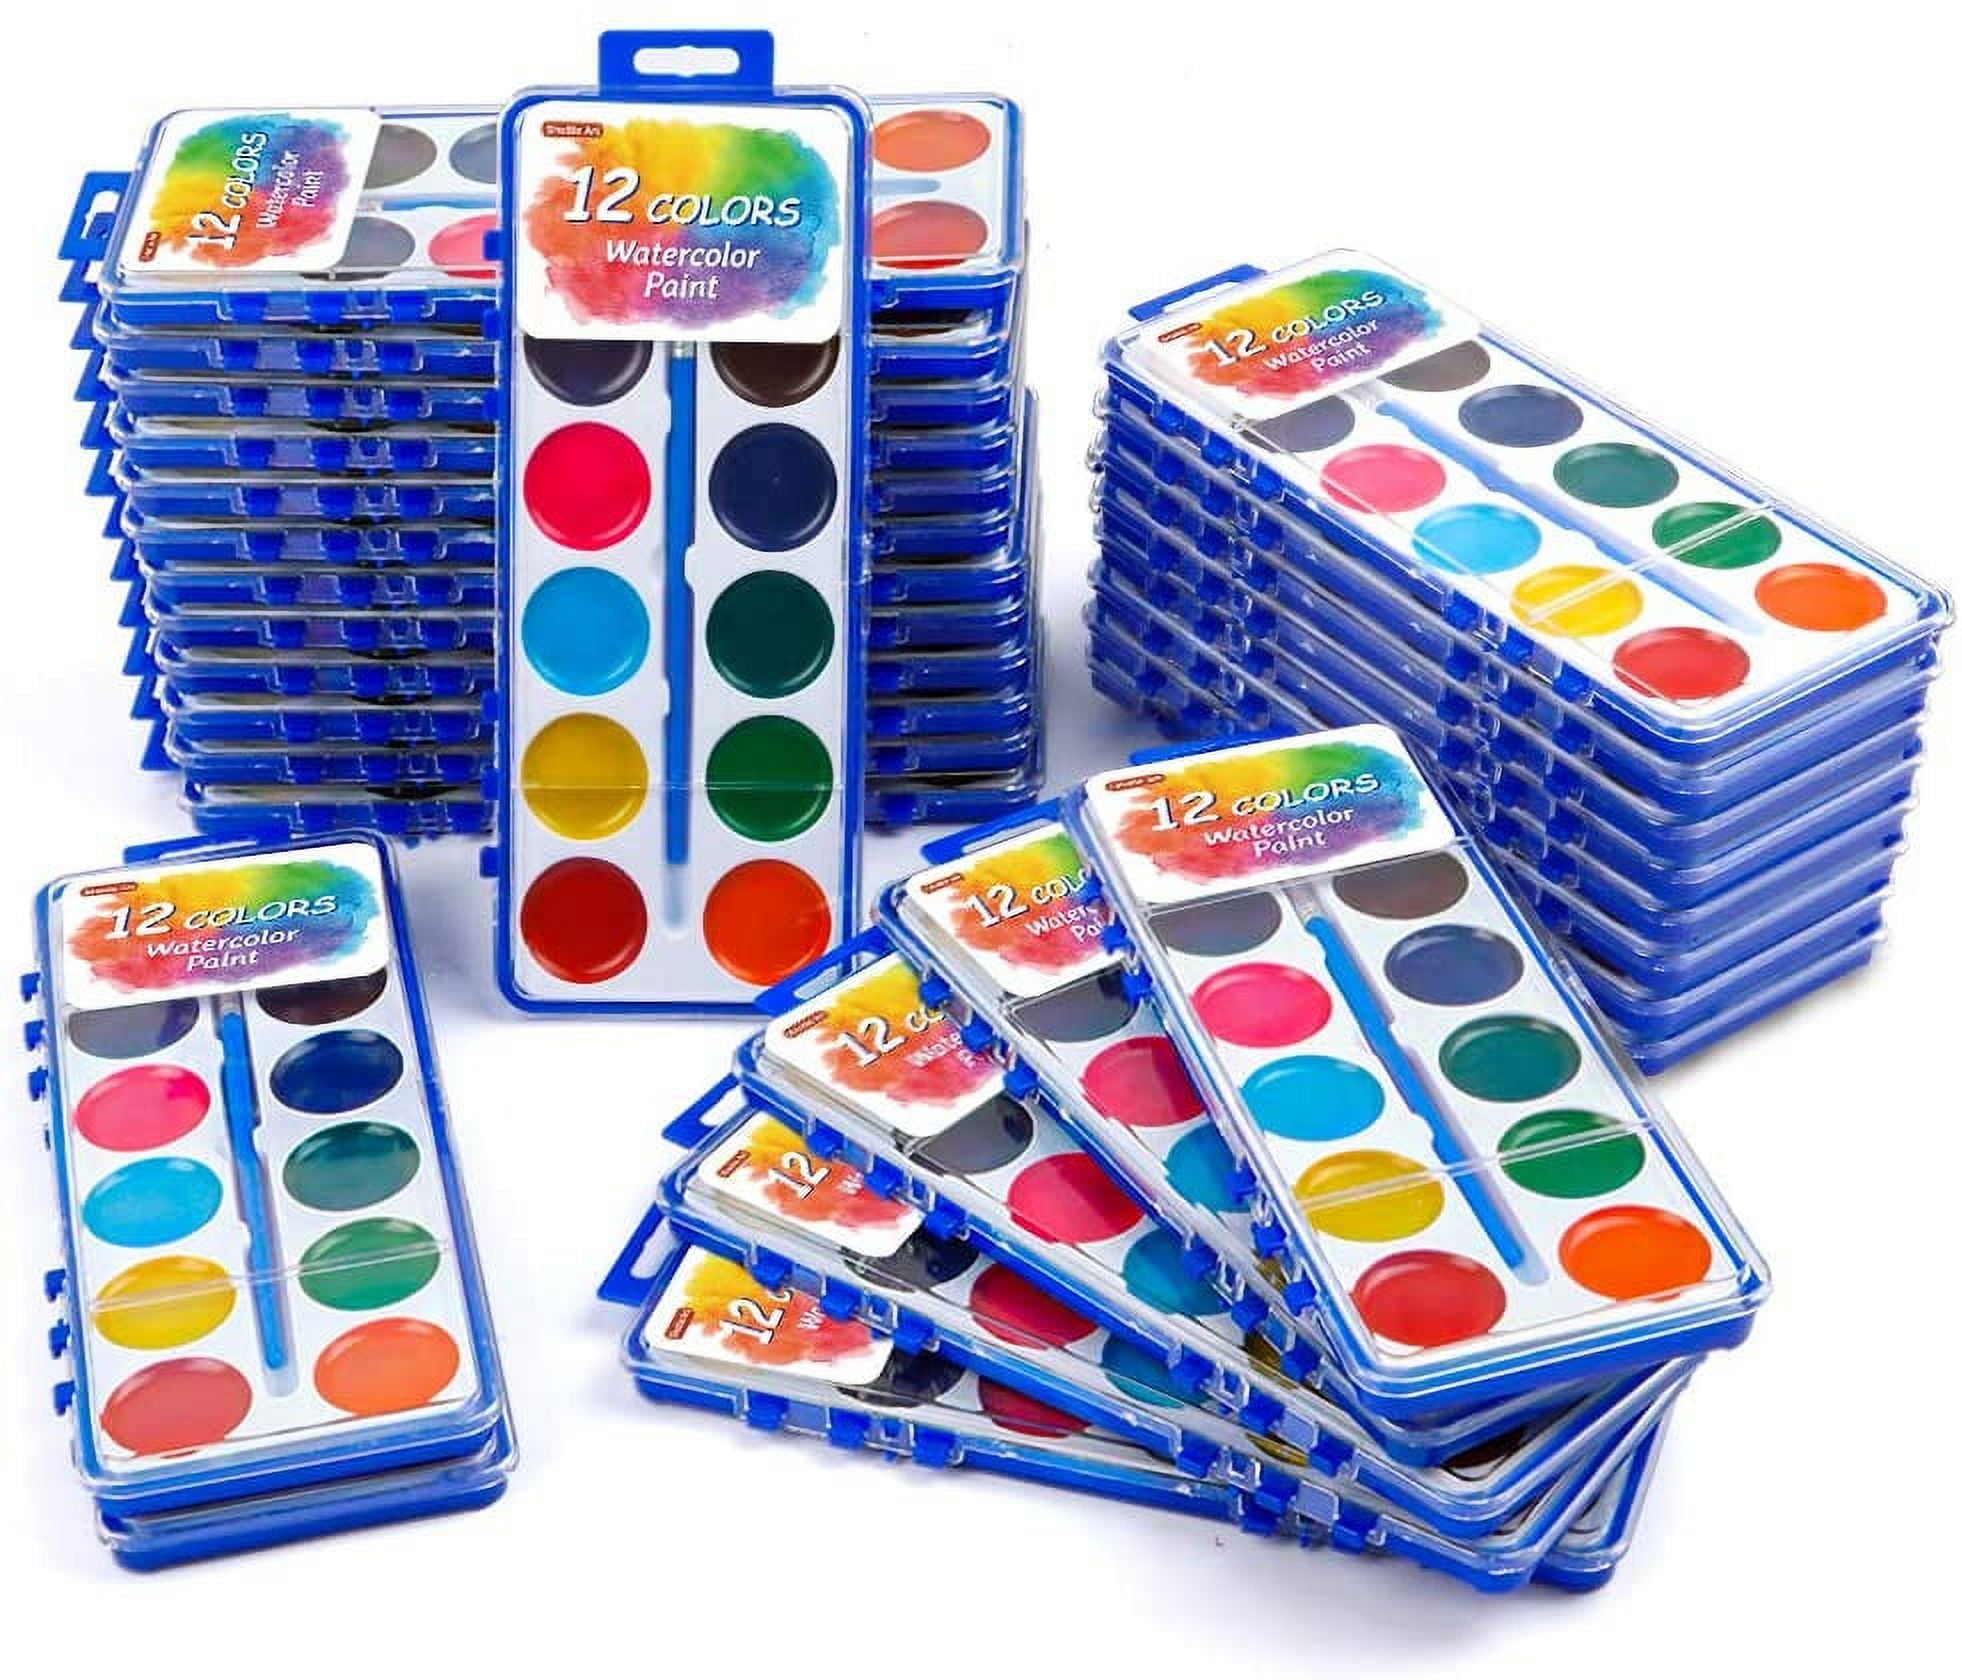 Mini Art Sets for Kids - Pack of 12-23-Piece Kits with Watercolors, Cr ·  Art Creativity